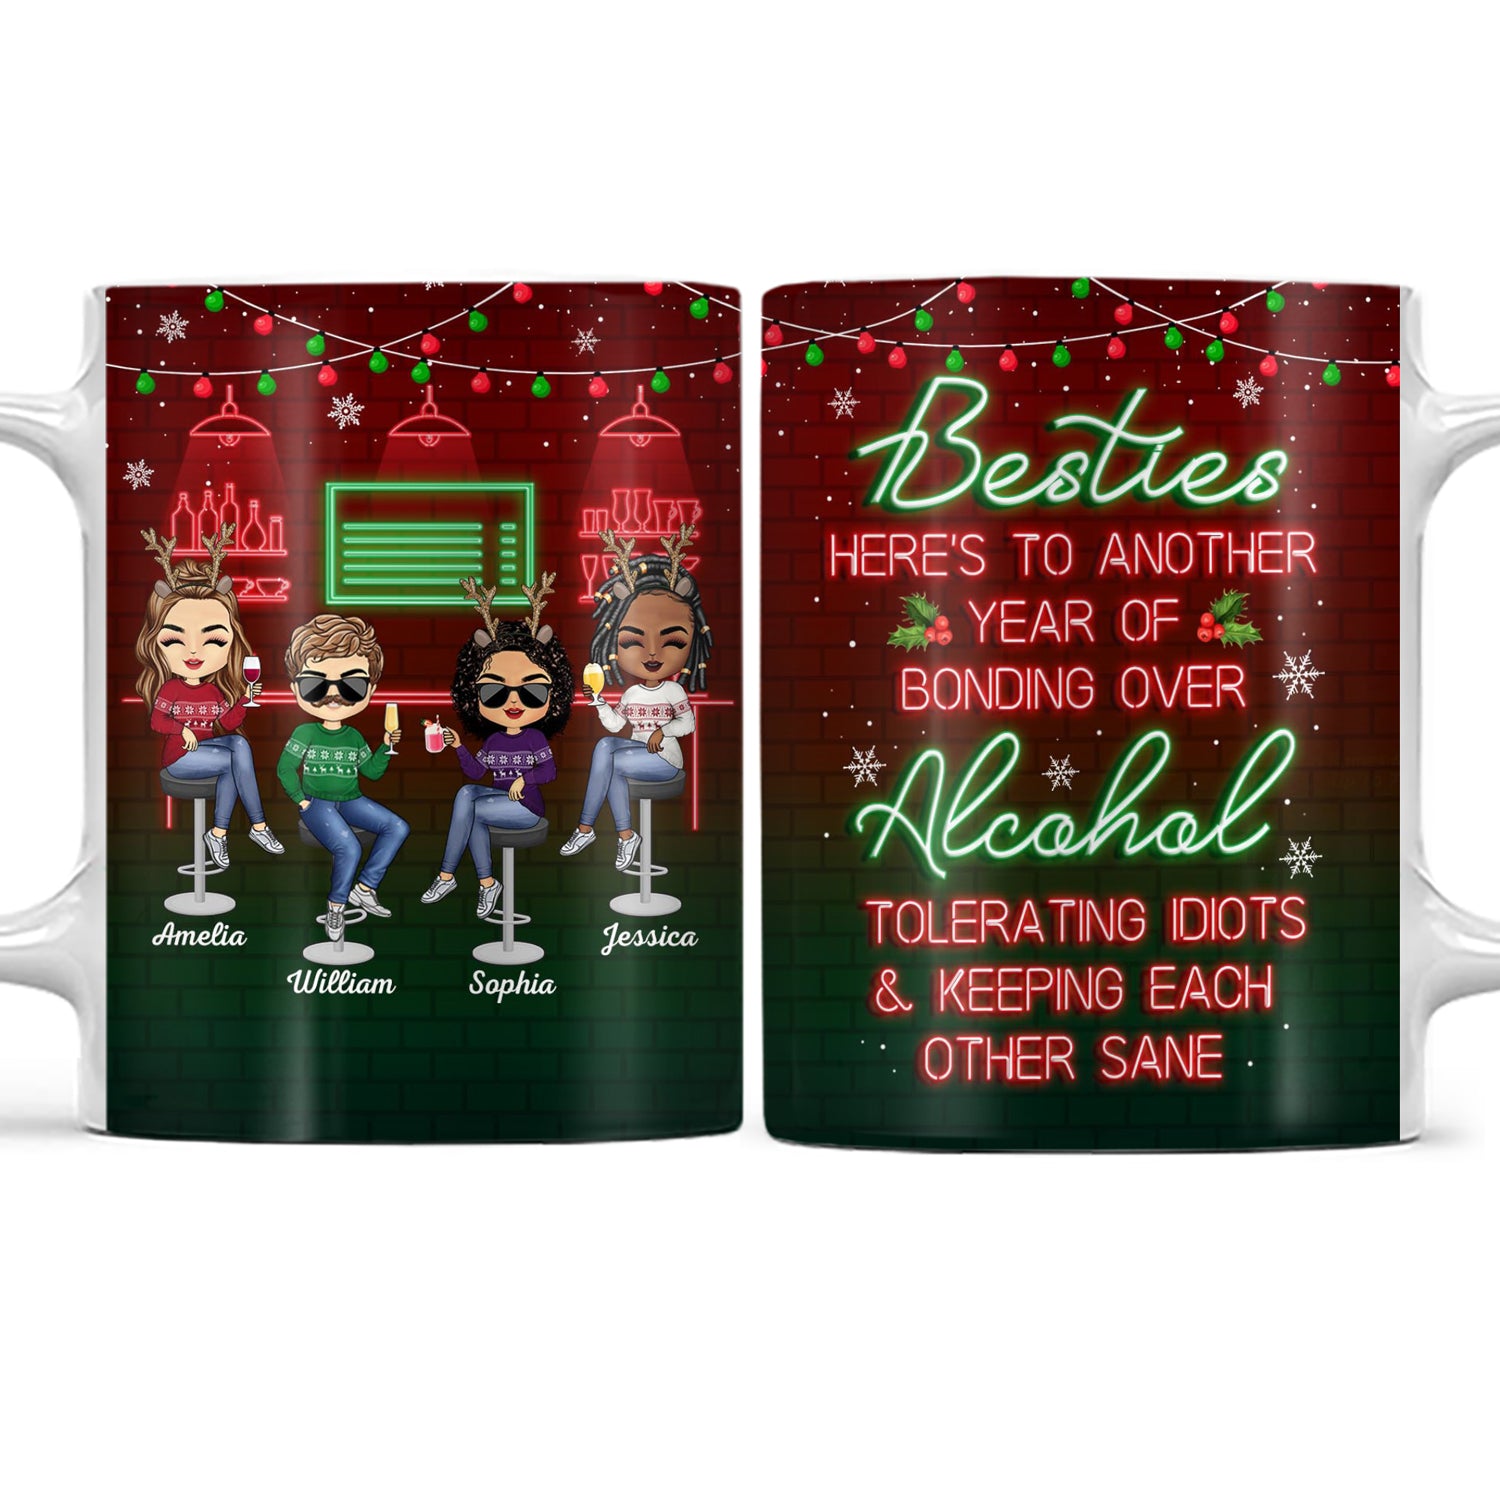 Here's To Another Year Of Bonding Over Alcohol Christmas Best Friends - Bestie BFF Gift - Personalized Custom White Edge-to-Edge Mug